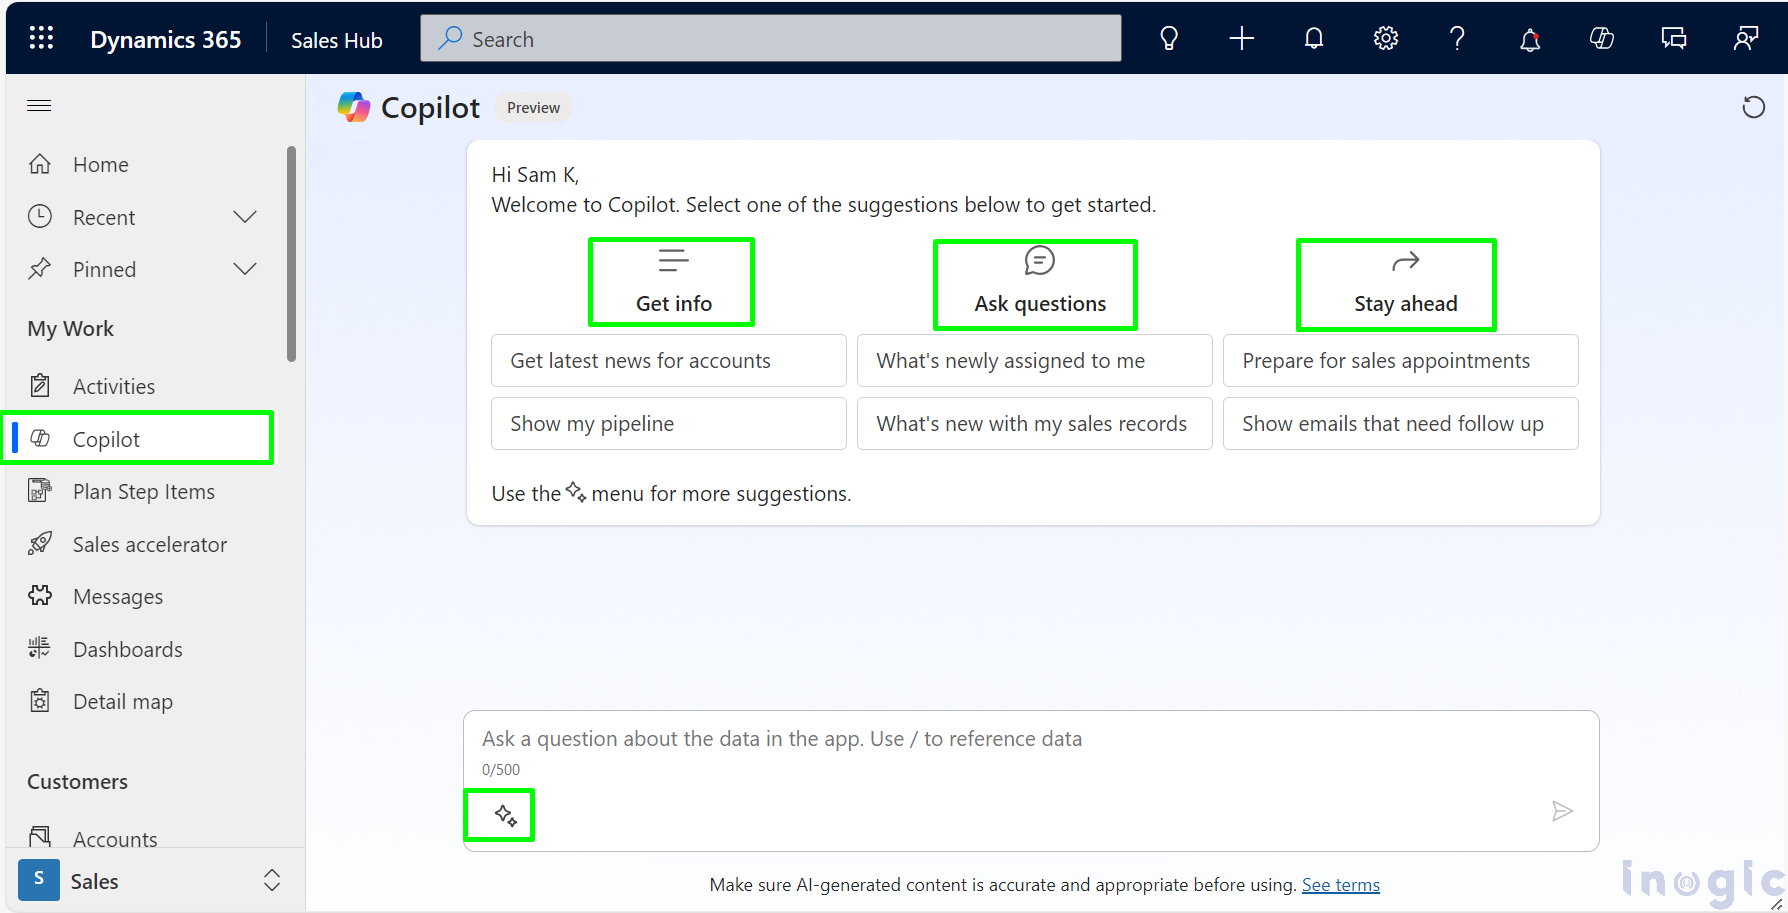 Copilot for Extracting Answers from SharePoint Sales Documents